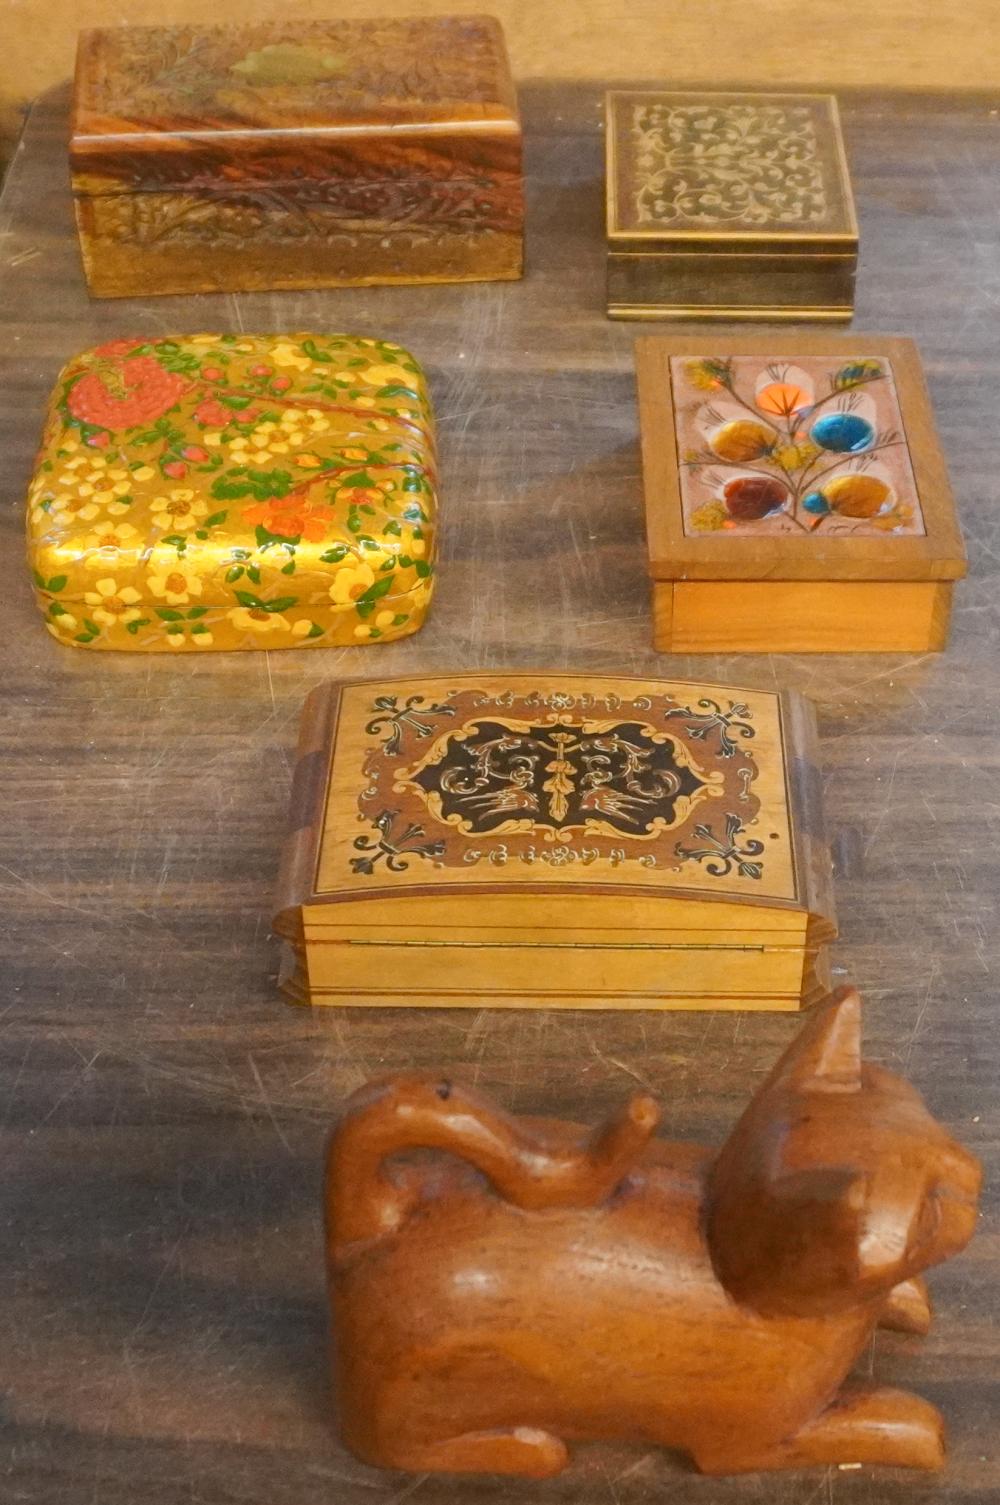 GROUP OF WOOD BOXES AND CATGroup of